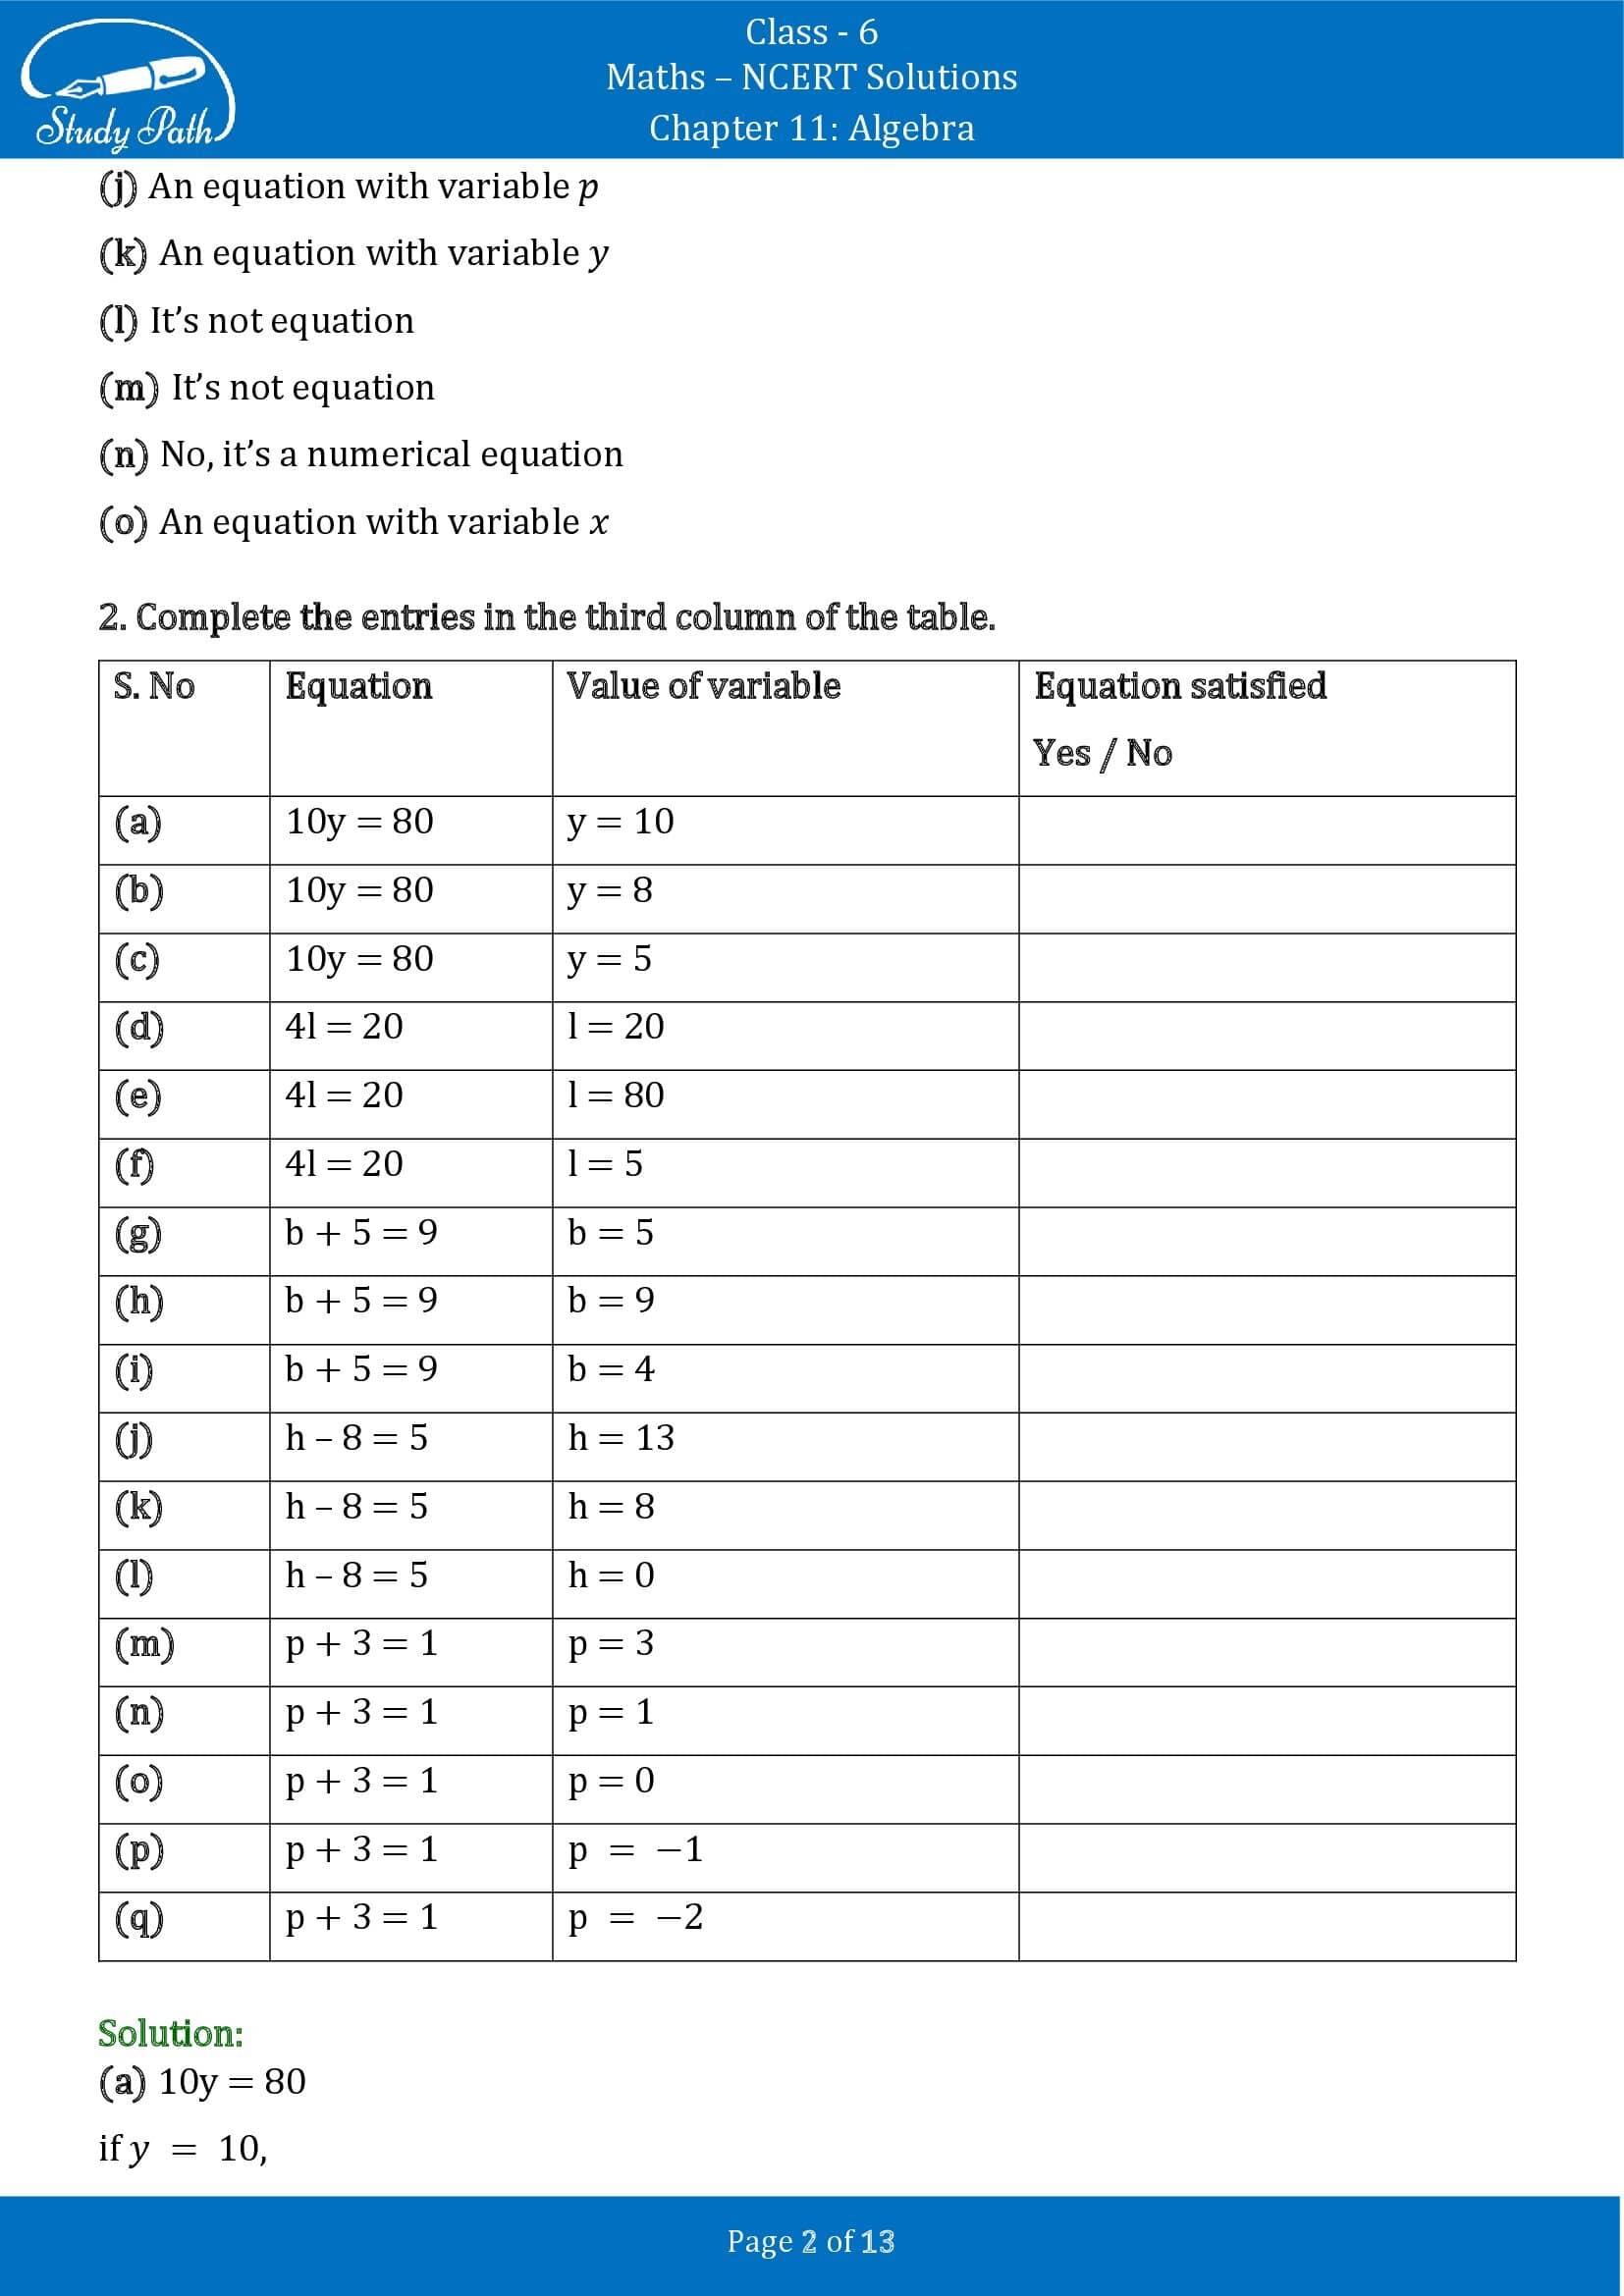 NCERT Solutions for Class 6 Maths Chapter 11 Algebra Exercise 11.5 00002